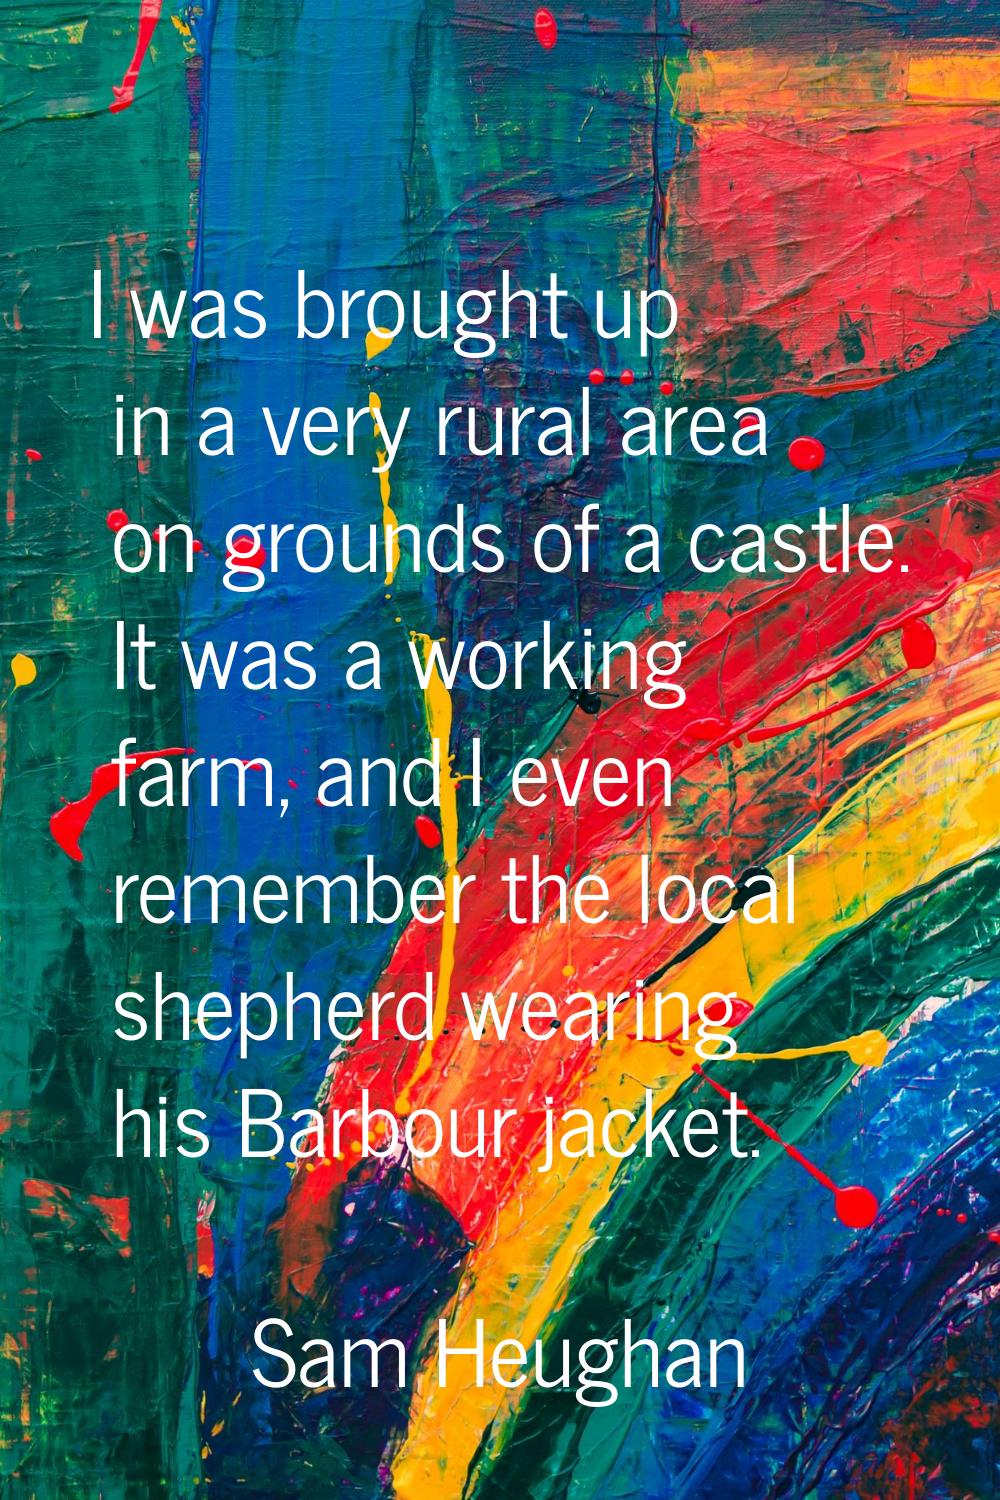 I was brought up in a very rural area on grounds of a castle. It was a working farm, and I even rem